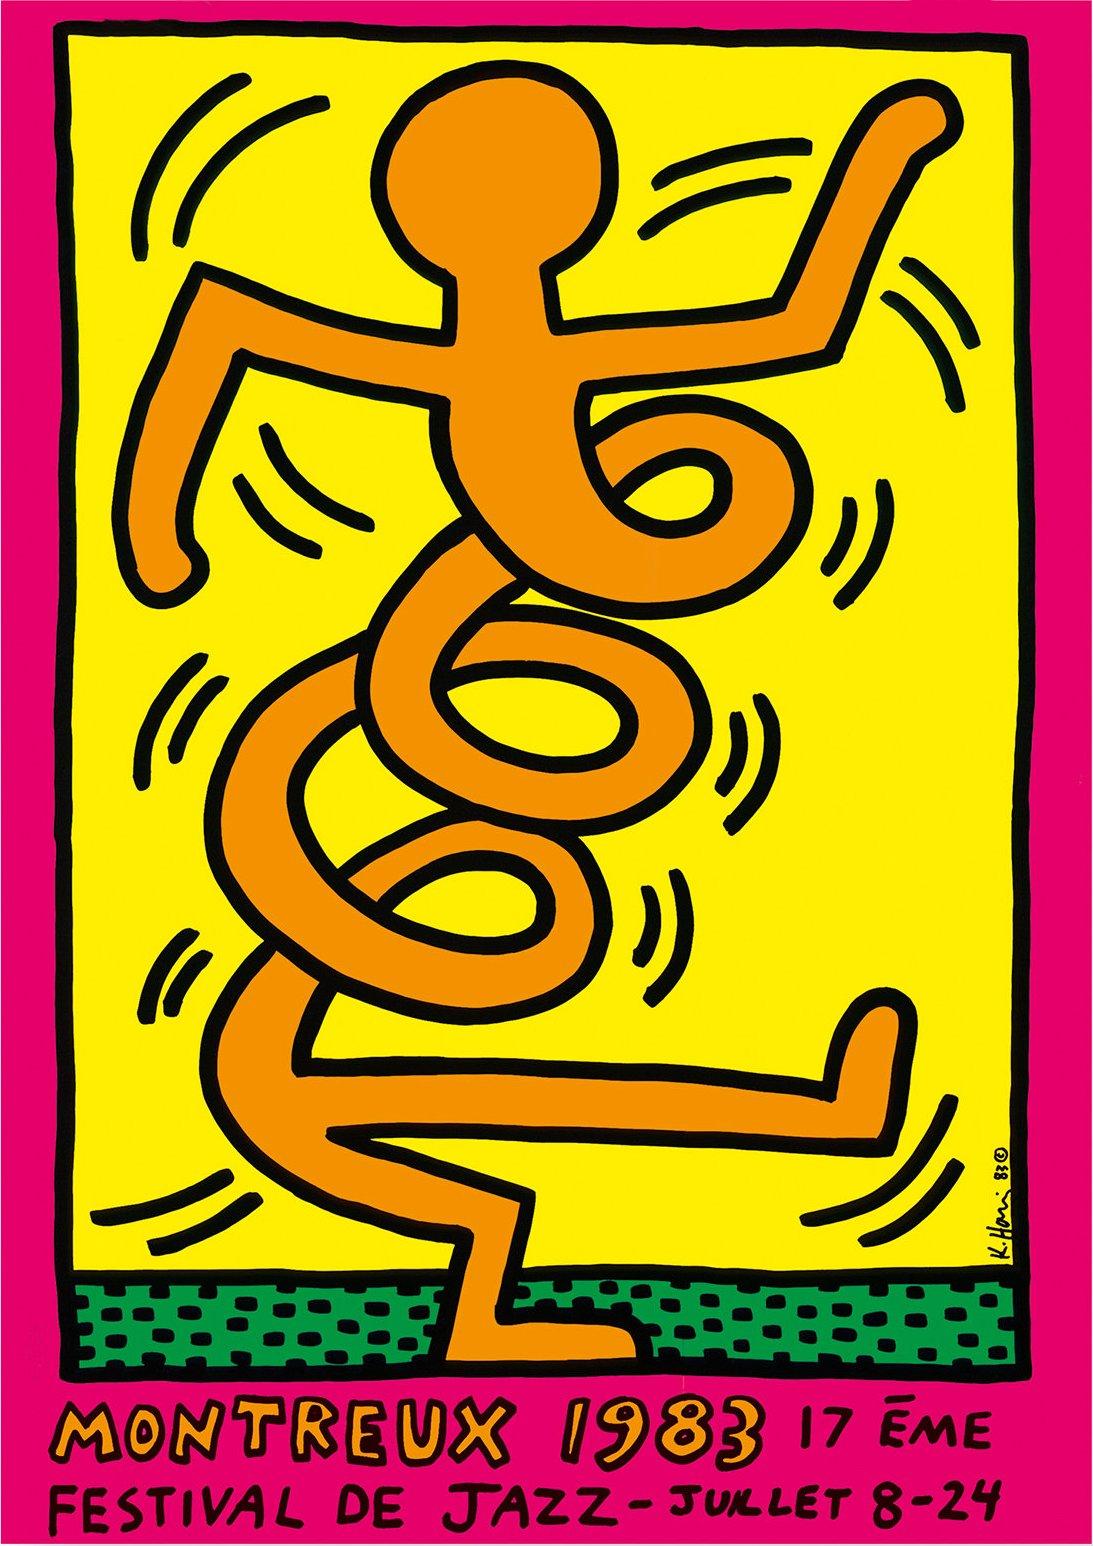 (after) Keith Haring Figurative Print - Jazz : Swing Guy (Pink) - Vintage Screenprint Poster, Montreux, 1983